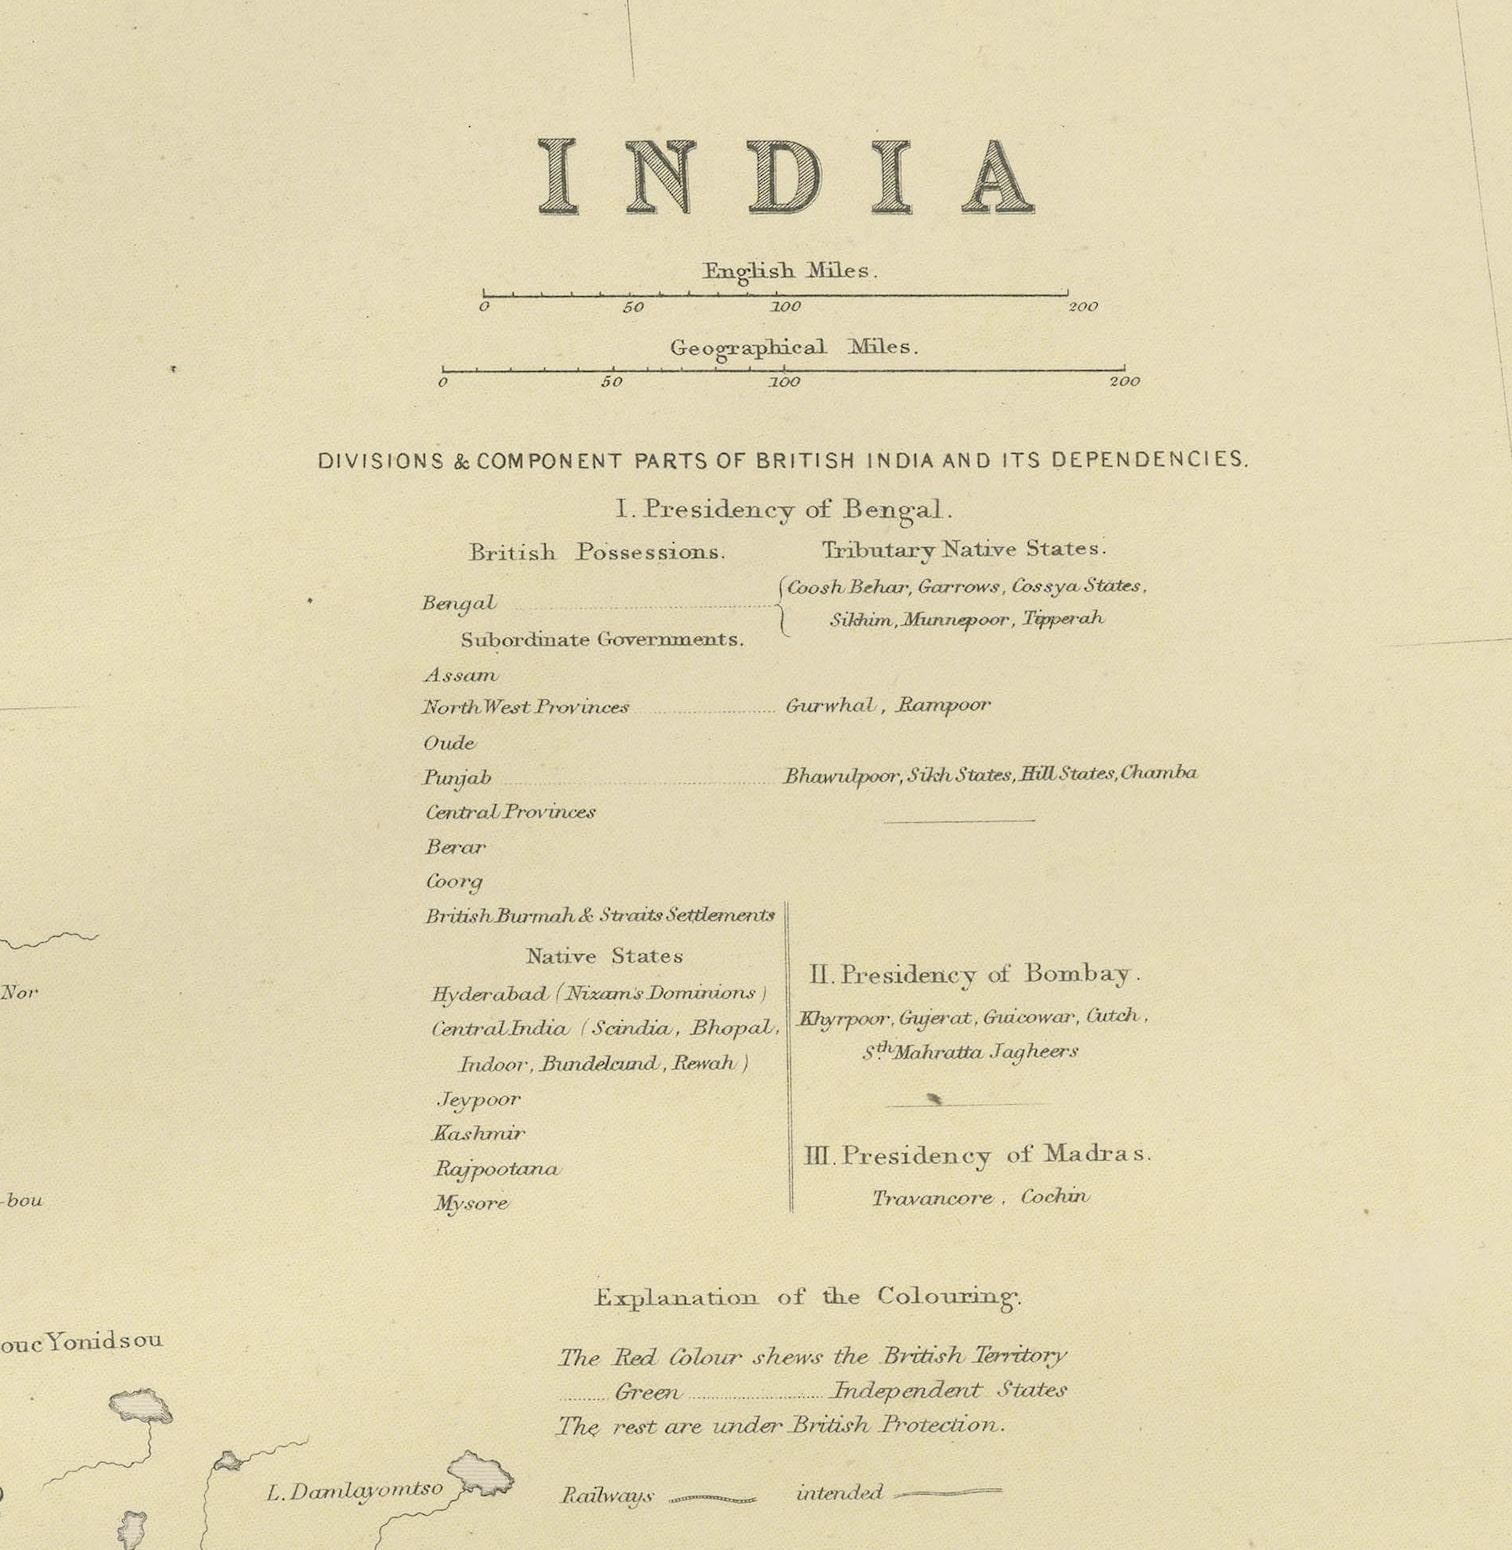 Late 19th Century Cartographic Elegance: The British Raj's India, 1882 Atlas by Blackie and Son For Sale